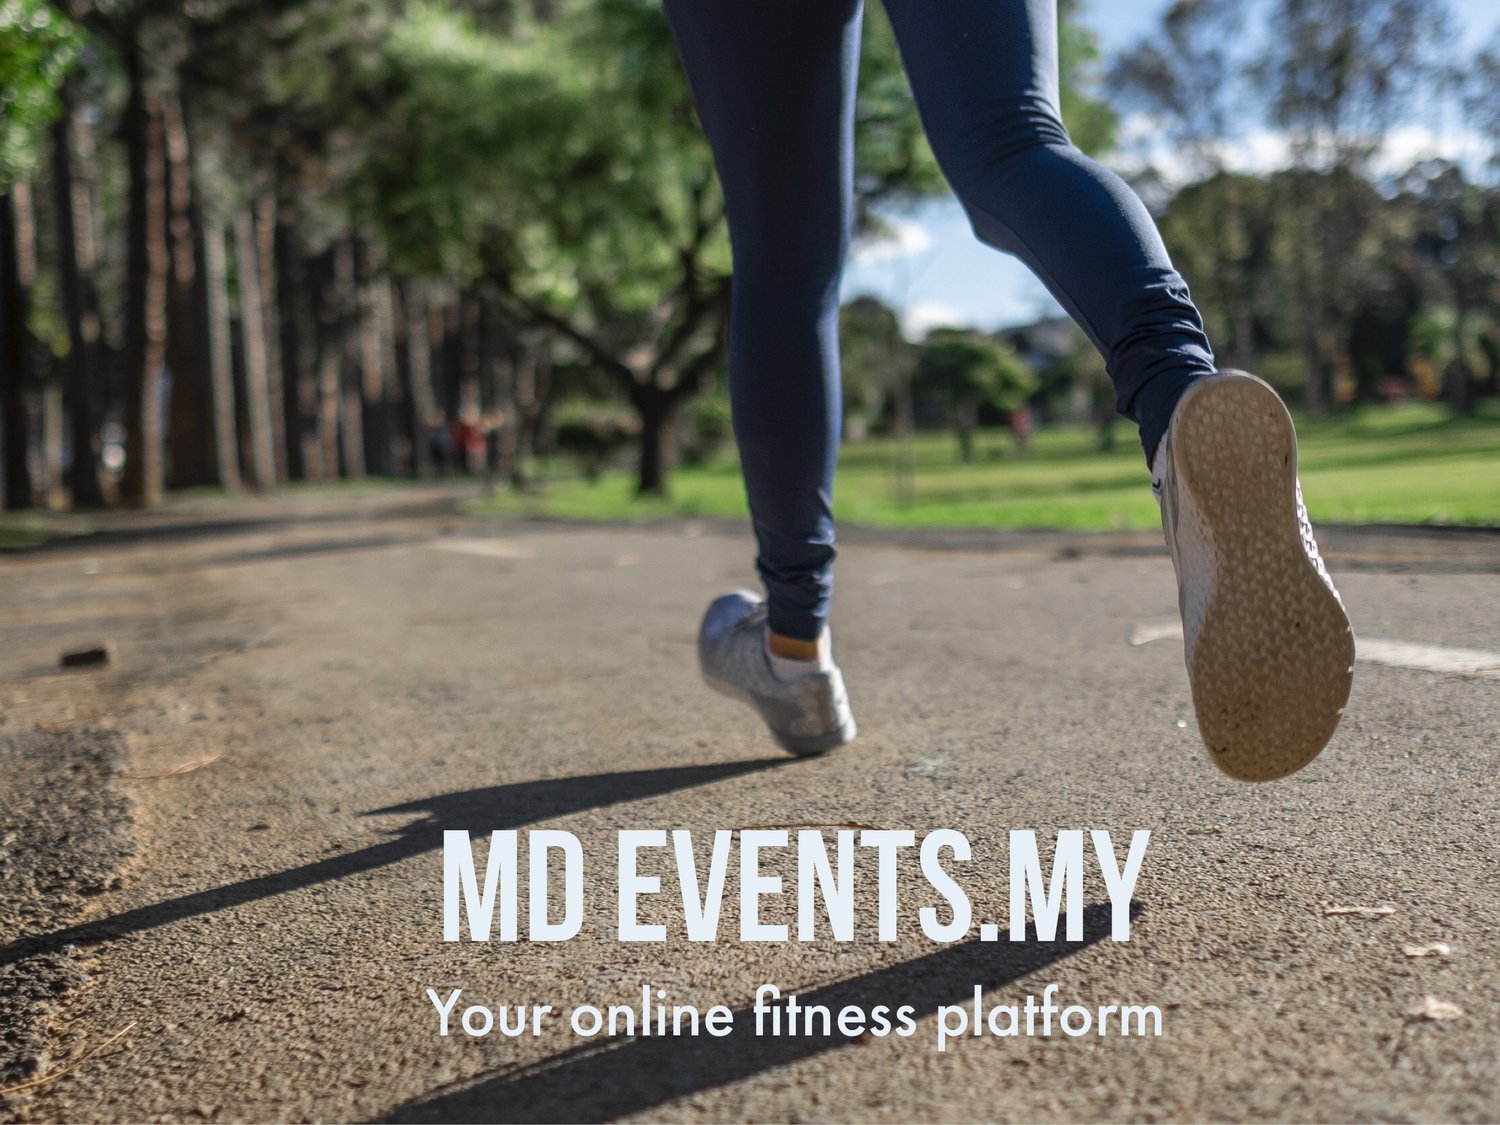 MD Events.MY, Malaysia Online Fitness Platform. Virtual Run Events